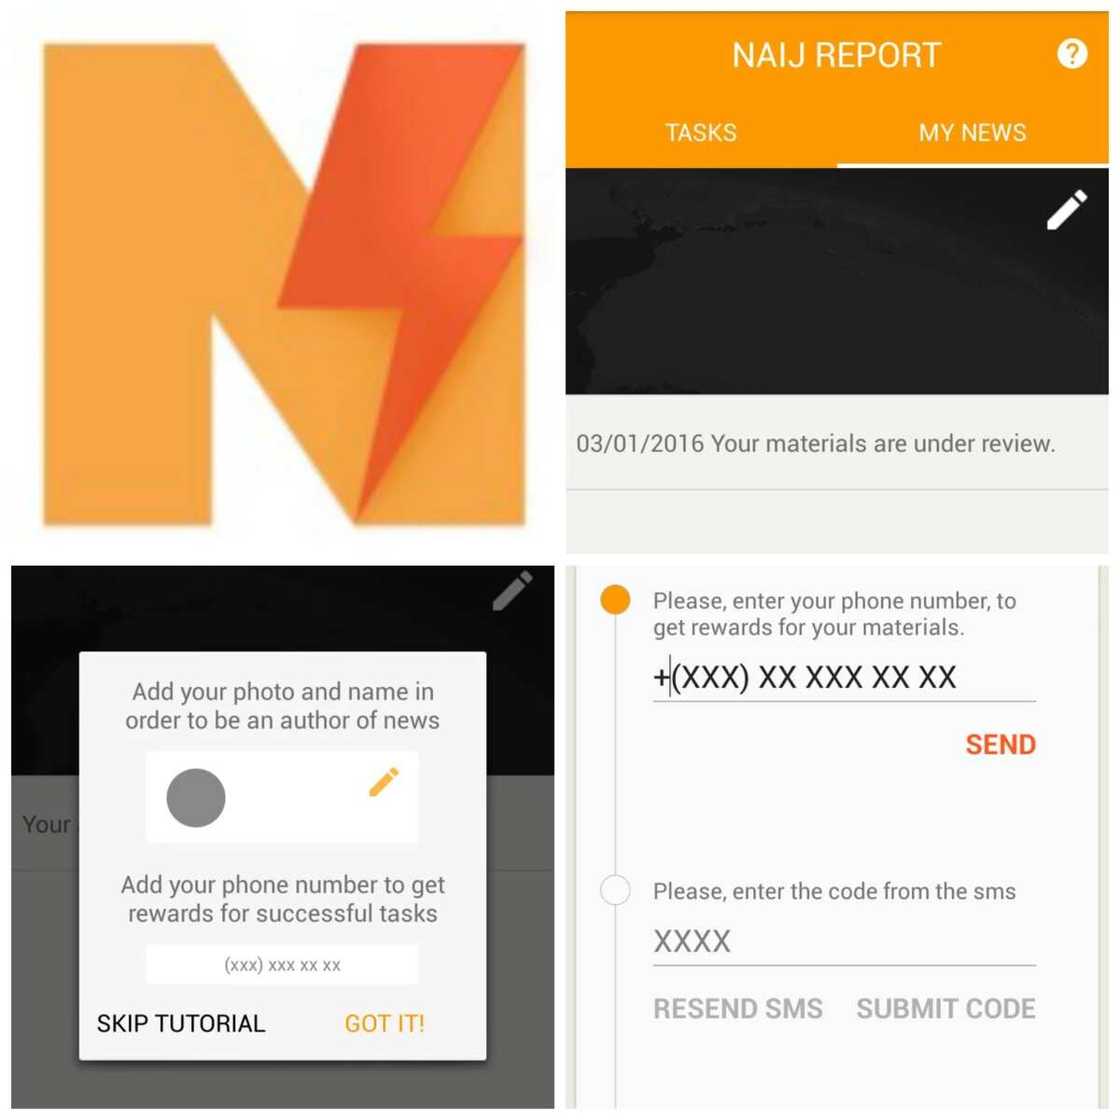 News For Money: Get Paid For Using NAIJ REPORT App